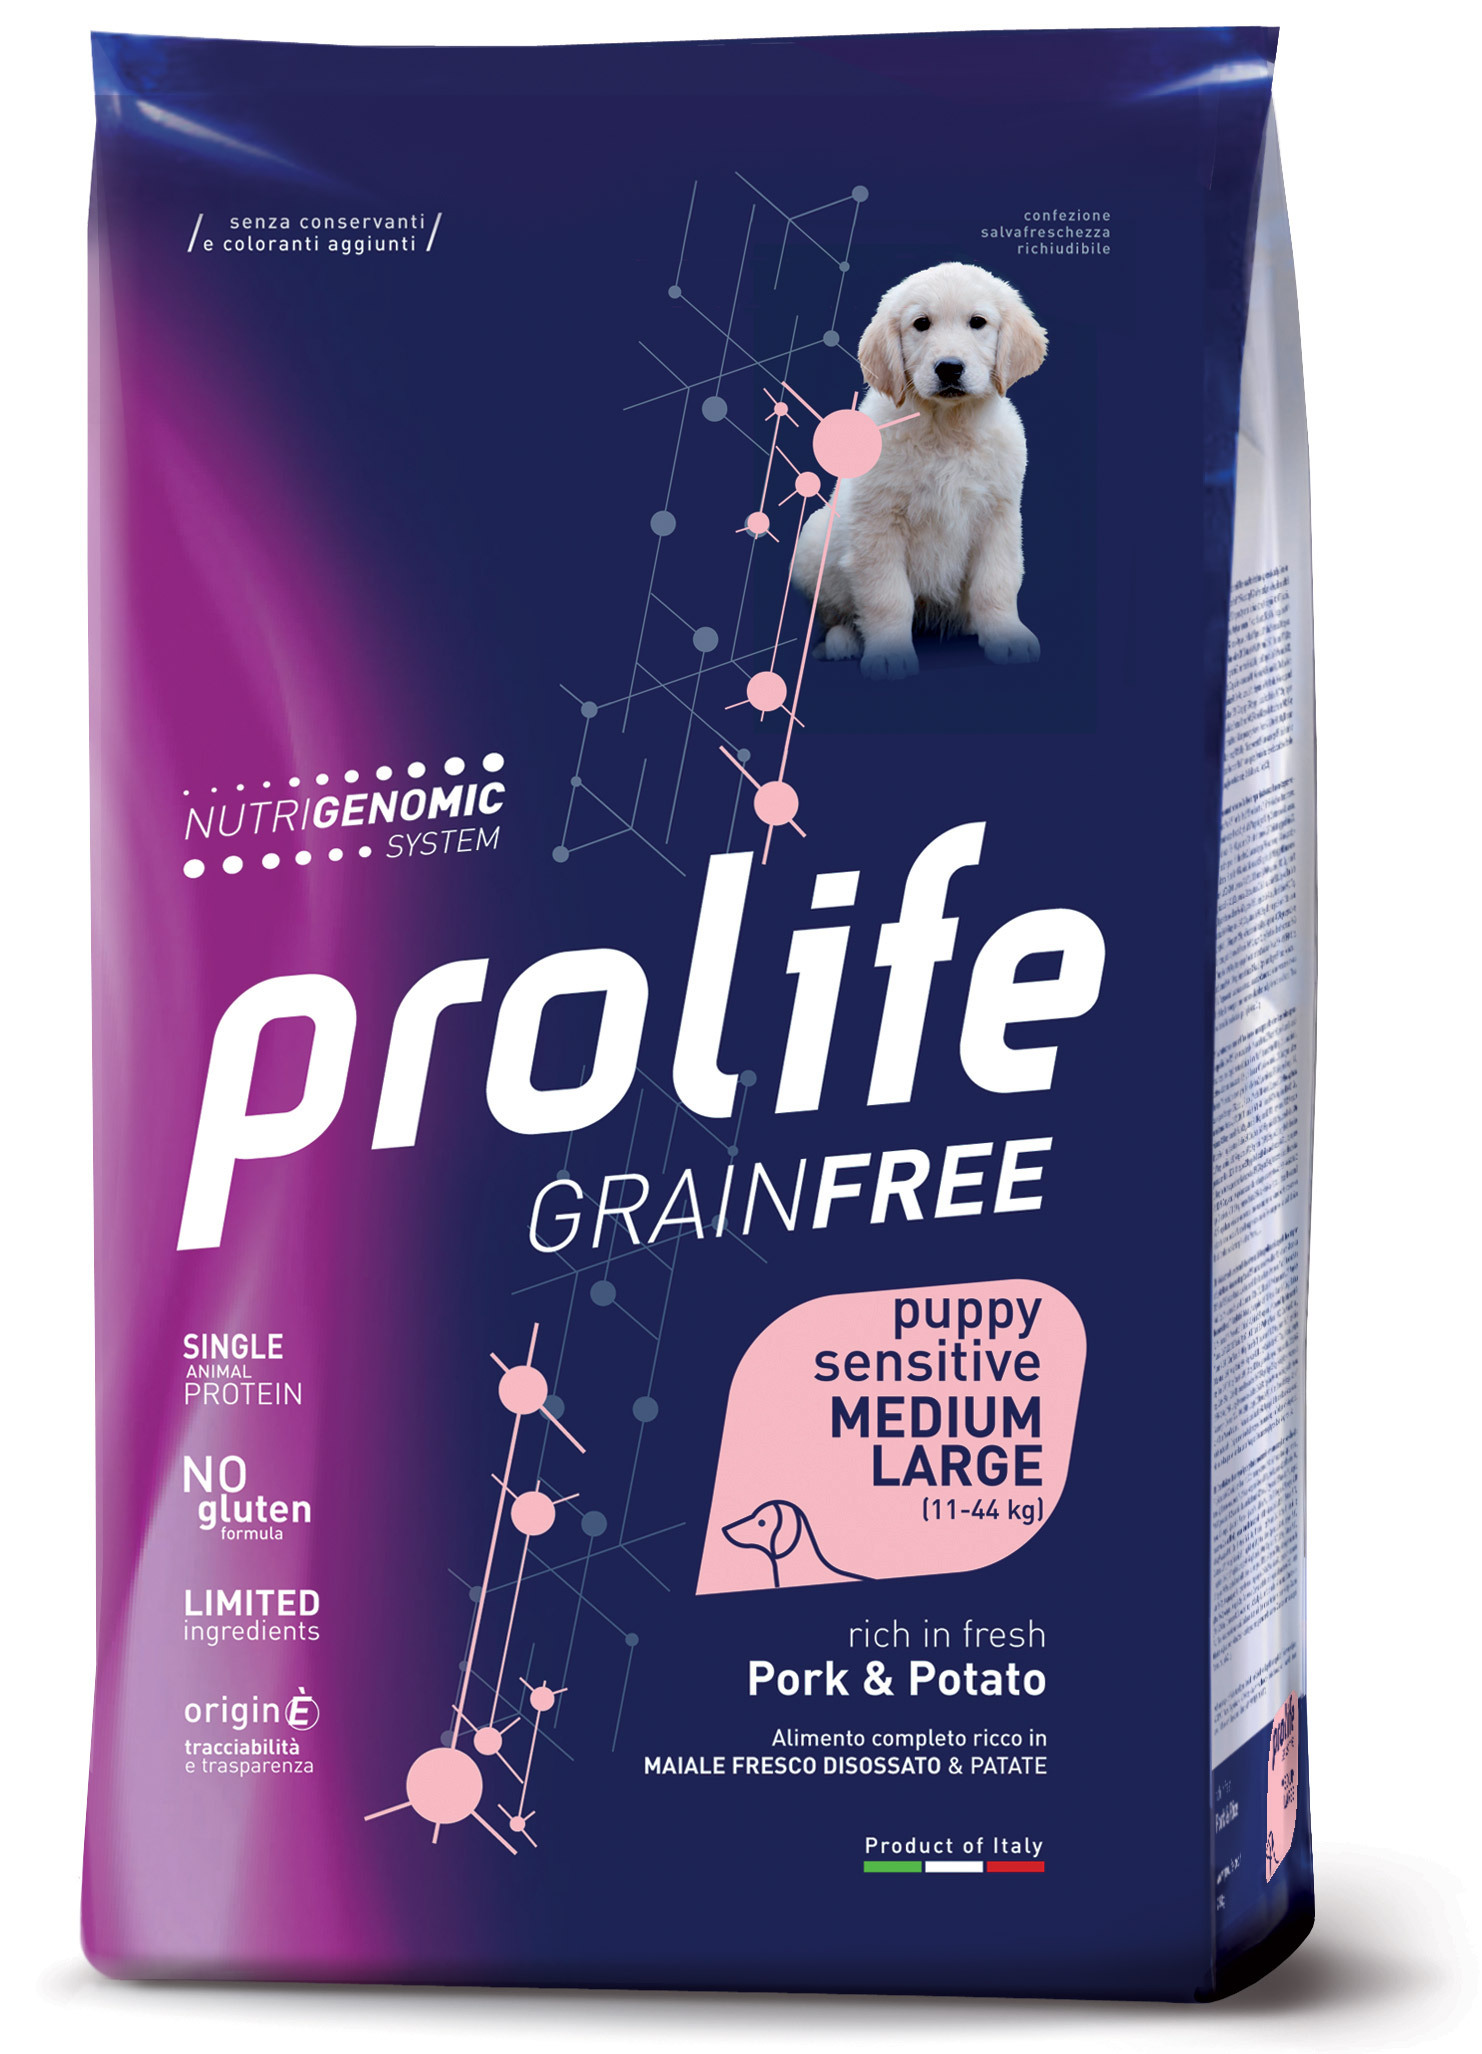 Complete pet food, rich in fresh deboned sole fish and potatoes for sensitive puppies.
